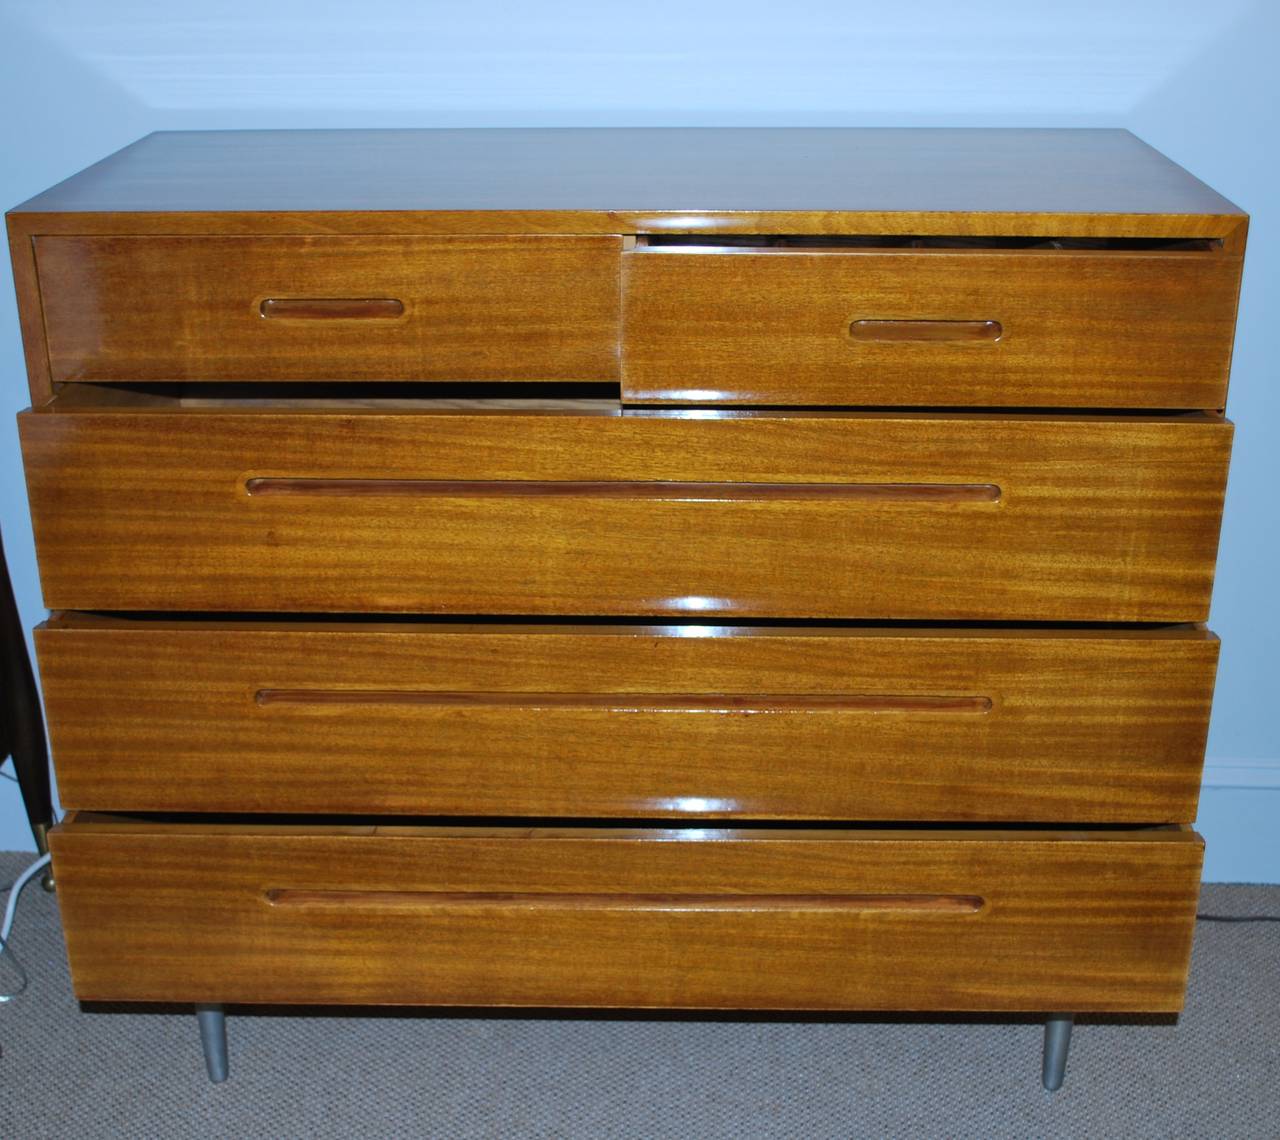 American Pair of Gentleman's Chests by Edward Wormley for Dunbar Model No. 4450